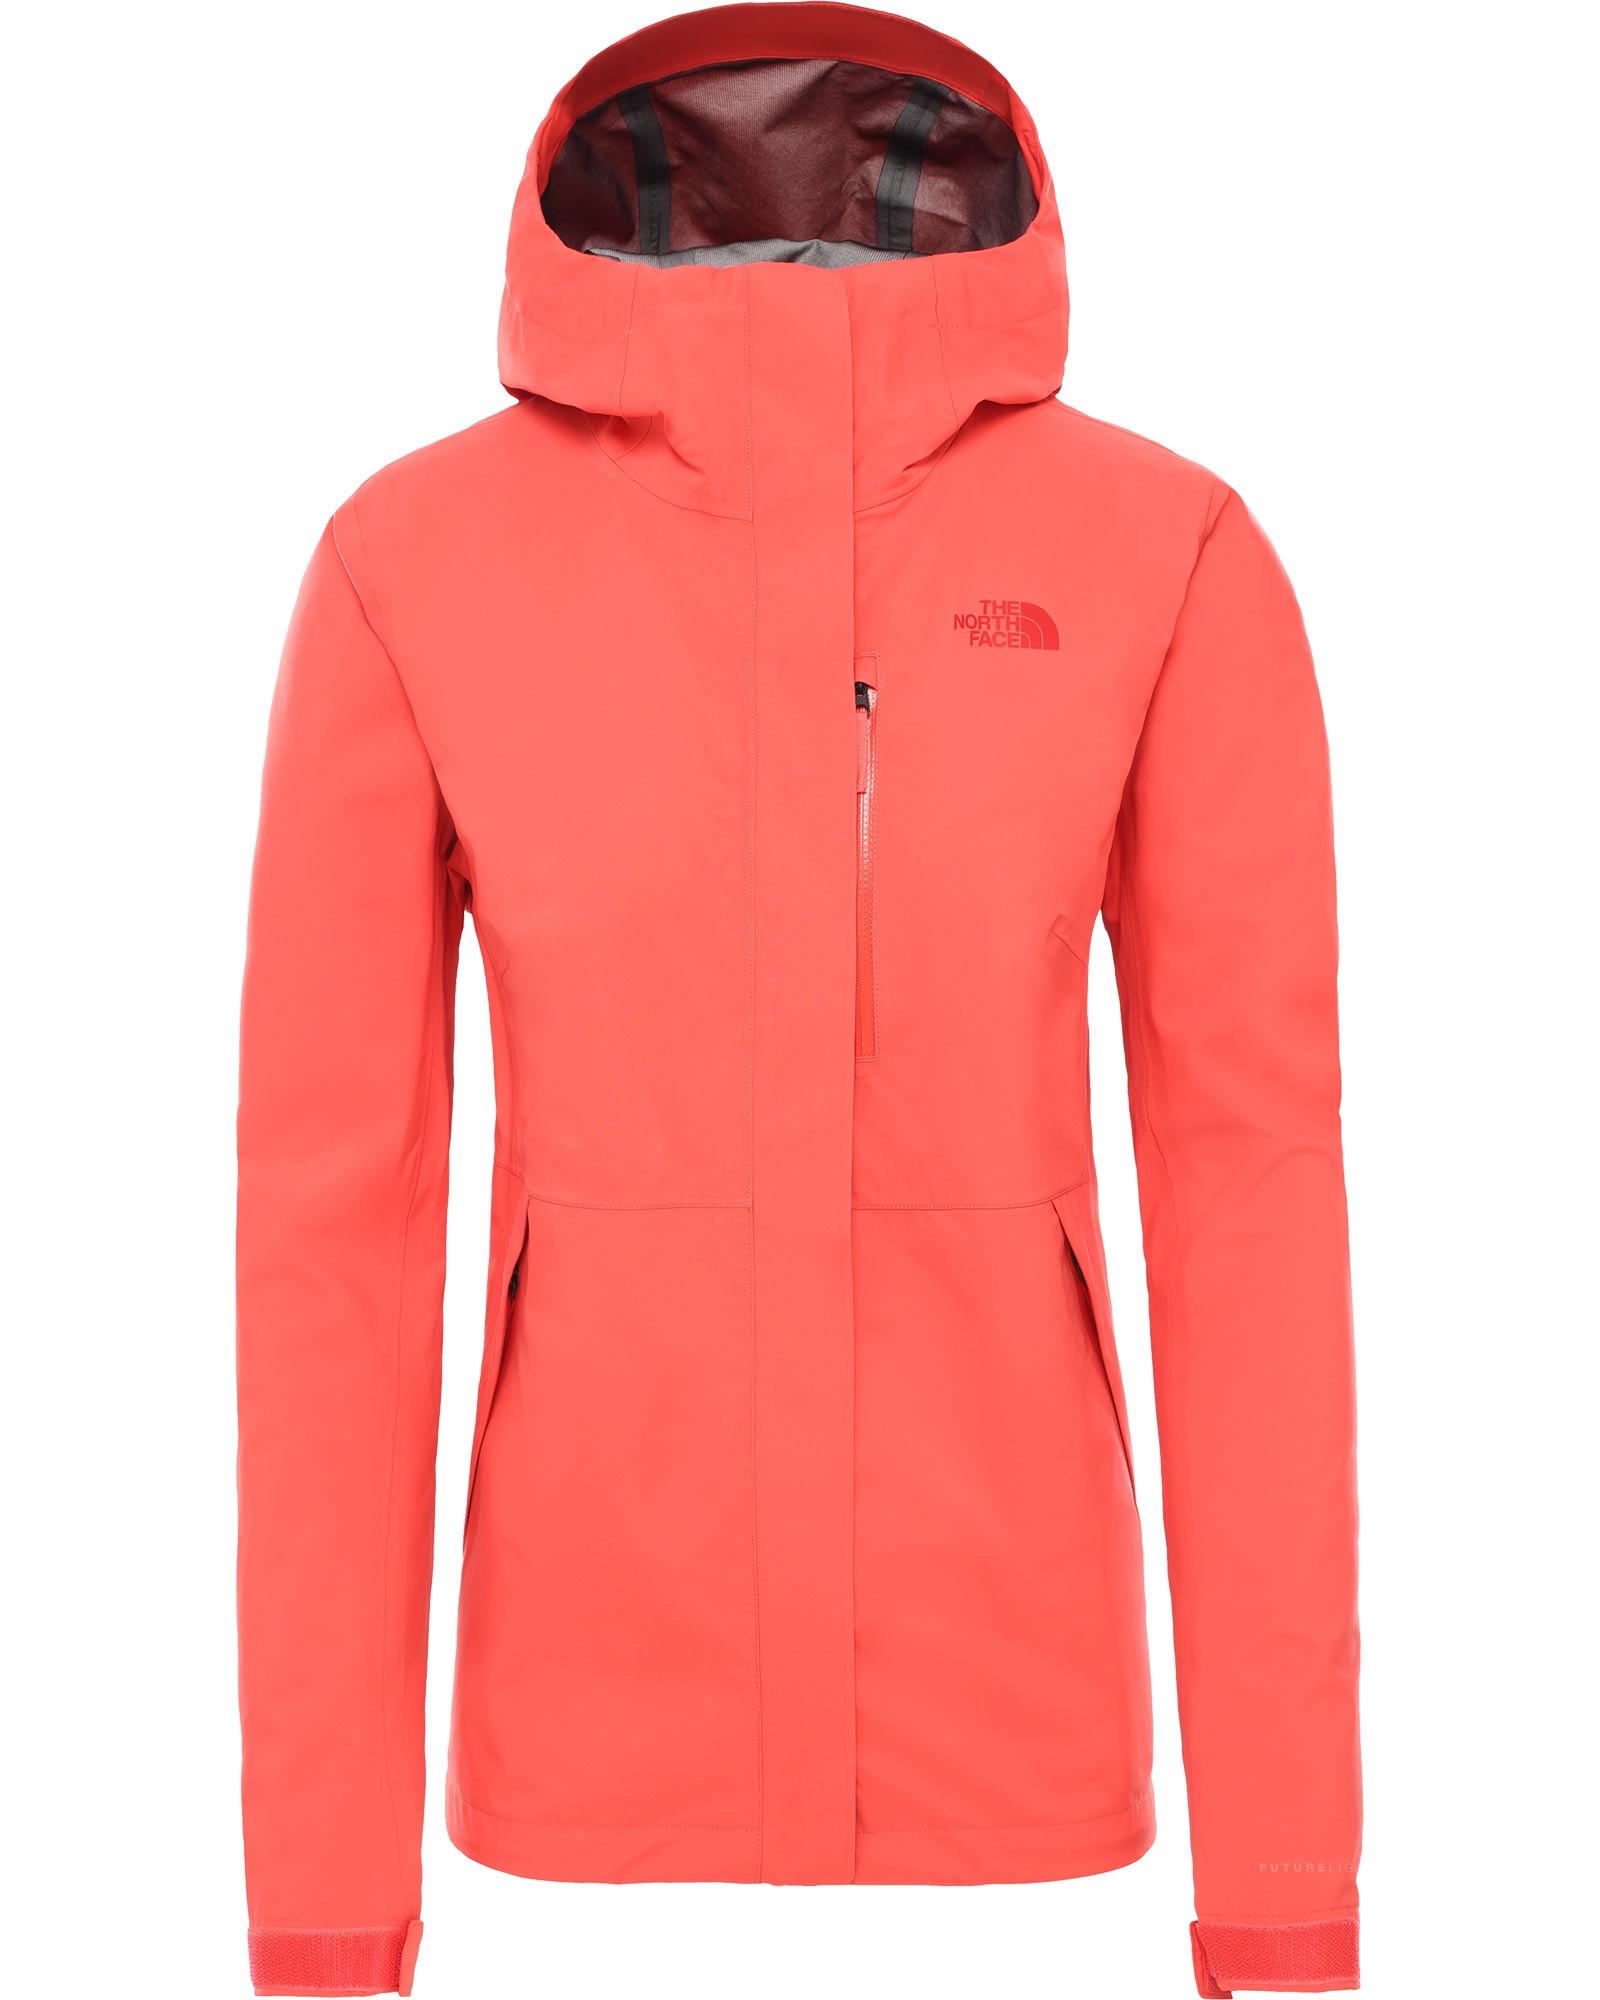 The North Face Dryzzle FUTURELIGHT Women’s Jacket - Cayenne Red XS